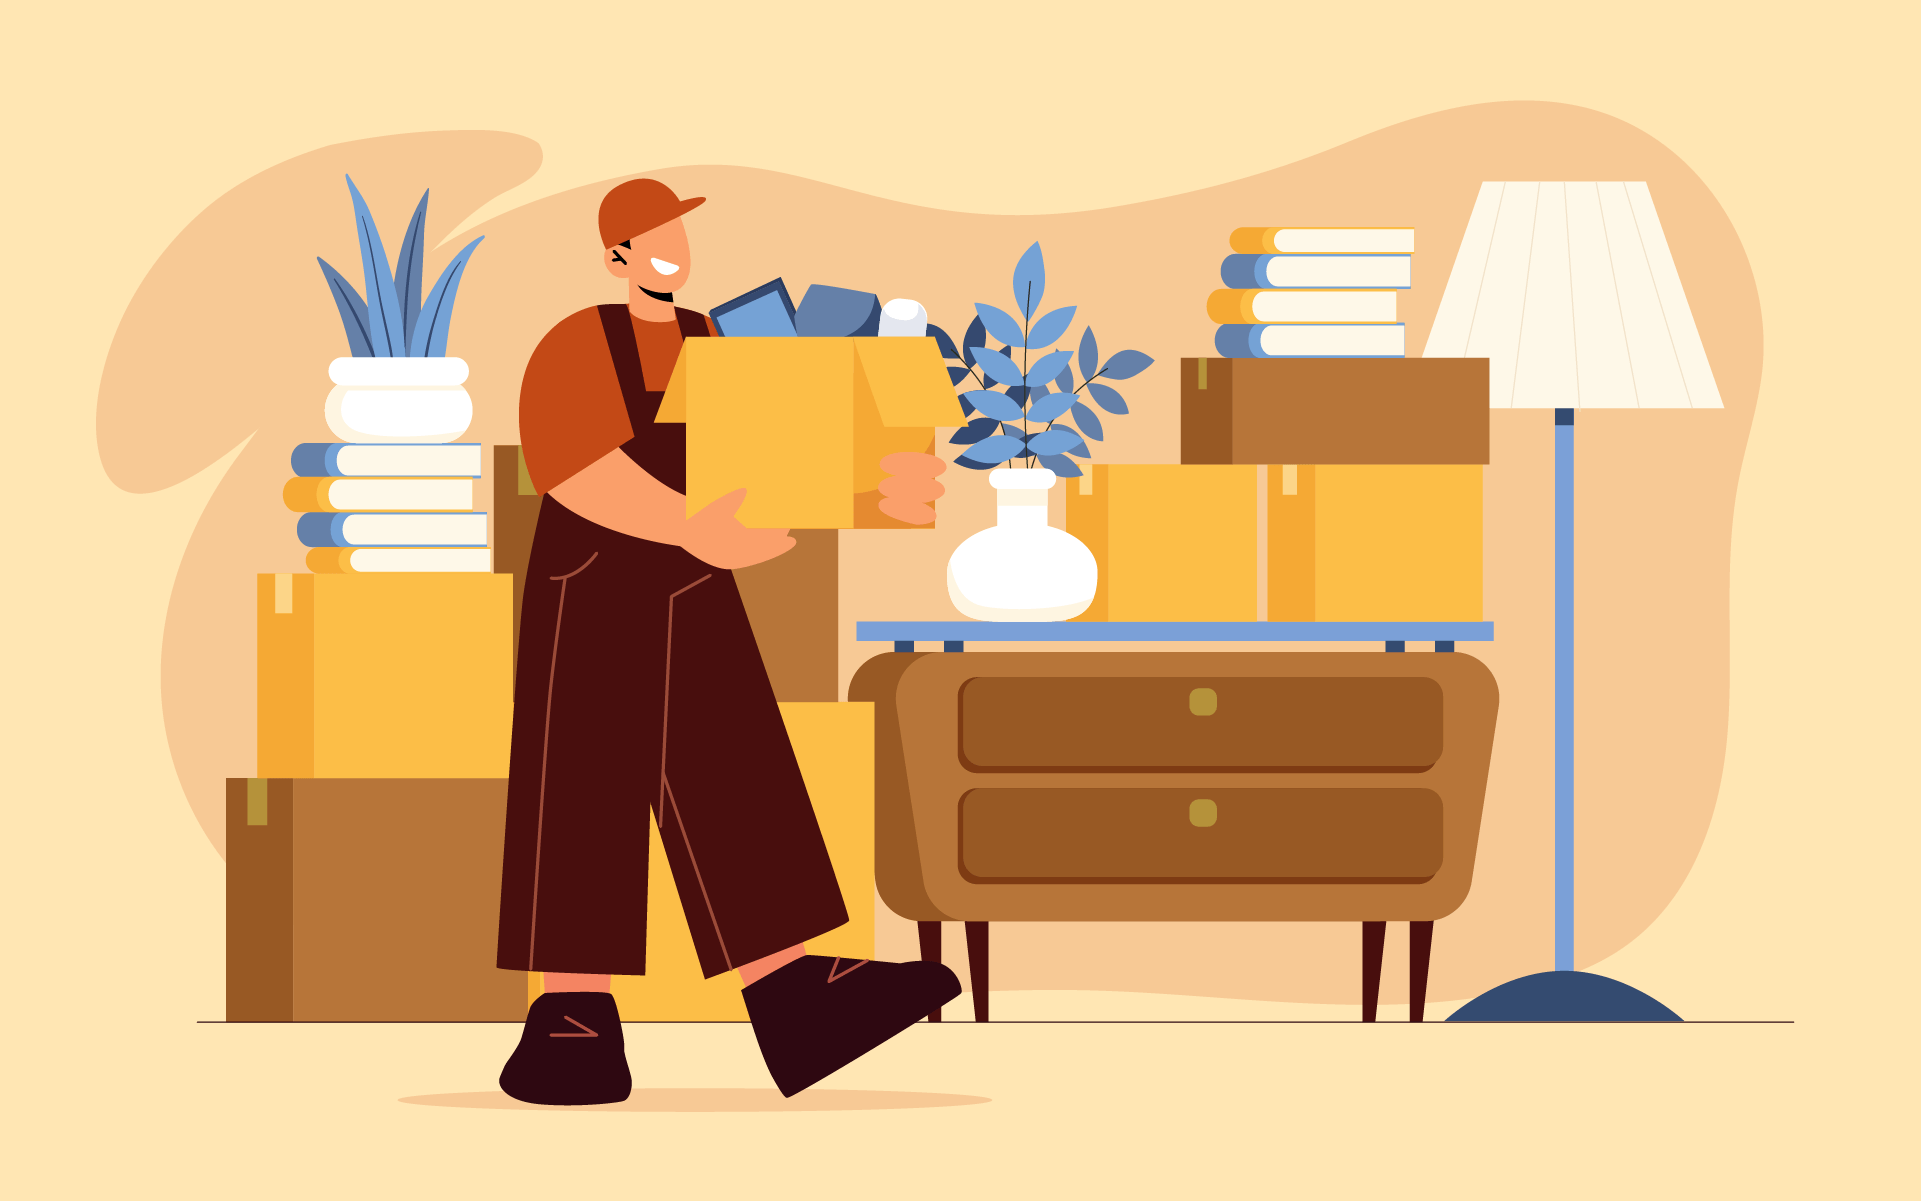 Moving house was a nightmare, but it helped me to find myself